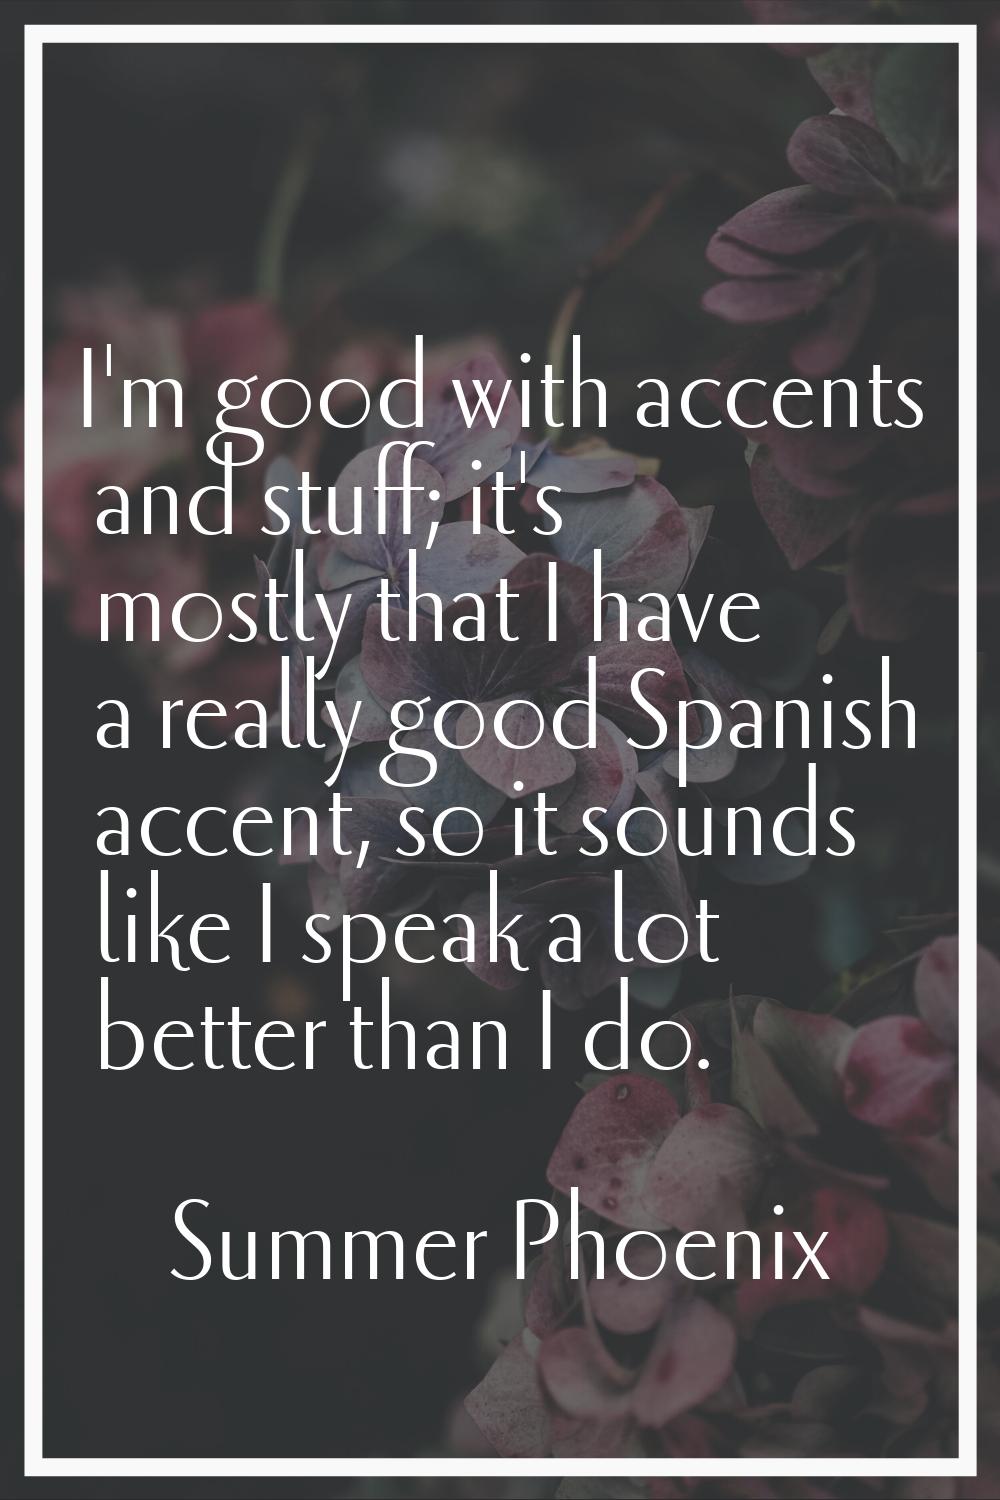 I'm good with accents and stuff; it's mostly that I have a really good Spanish accent, so it sounds